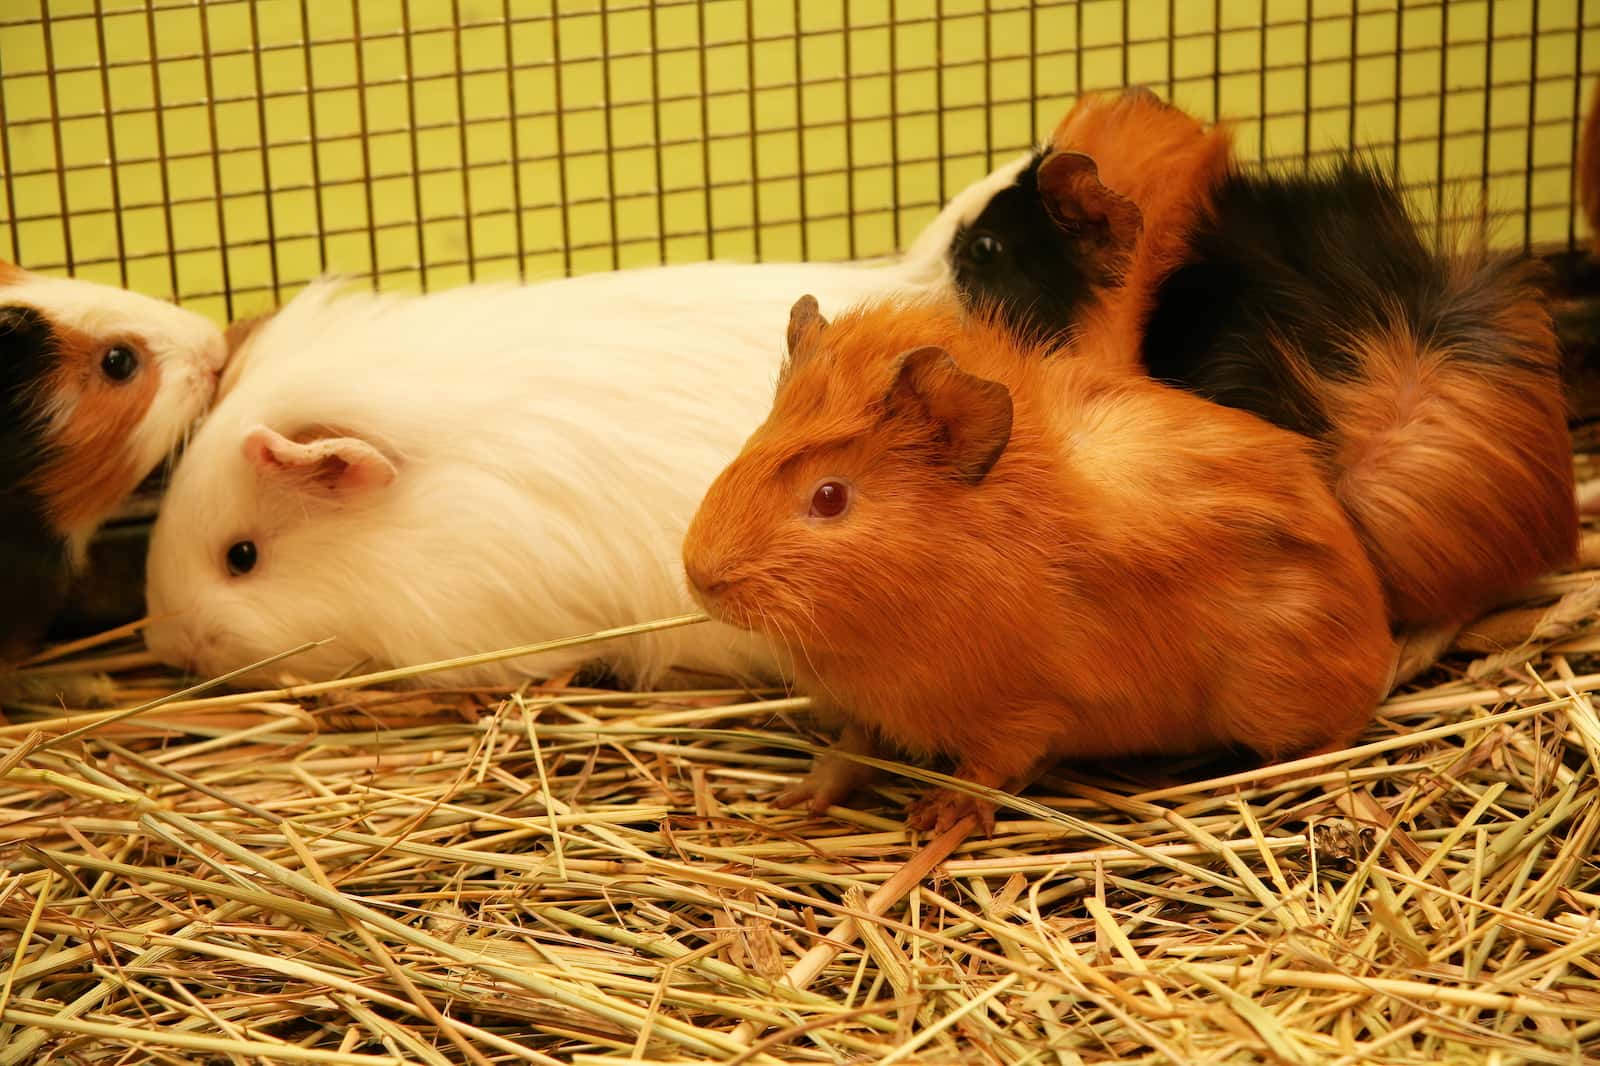 Guinea Pigs sniffing bottom of one another to communicate